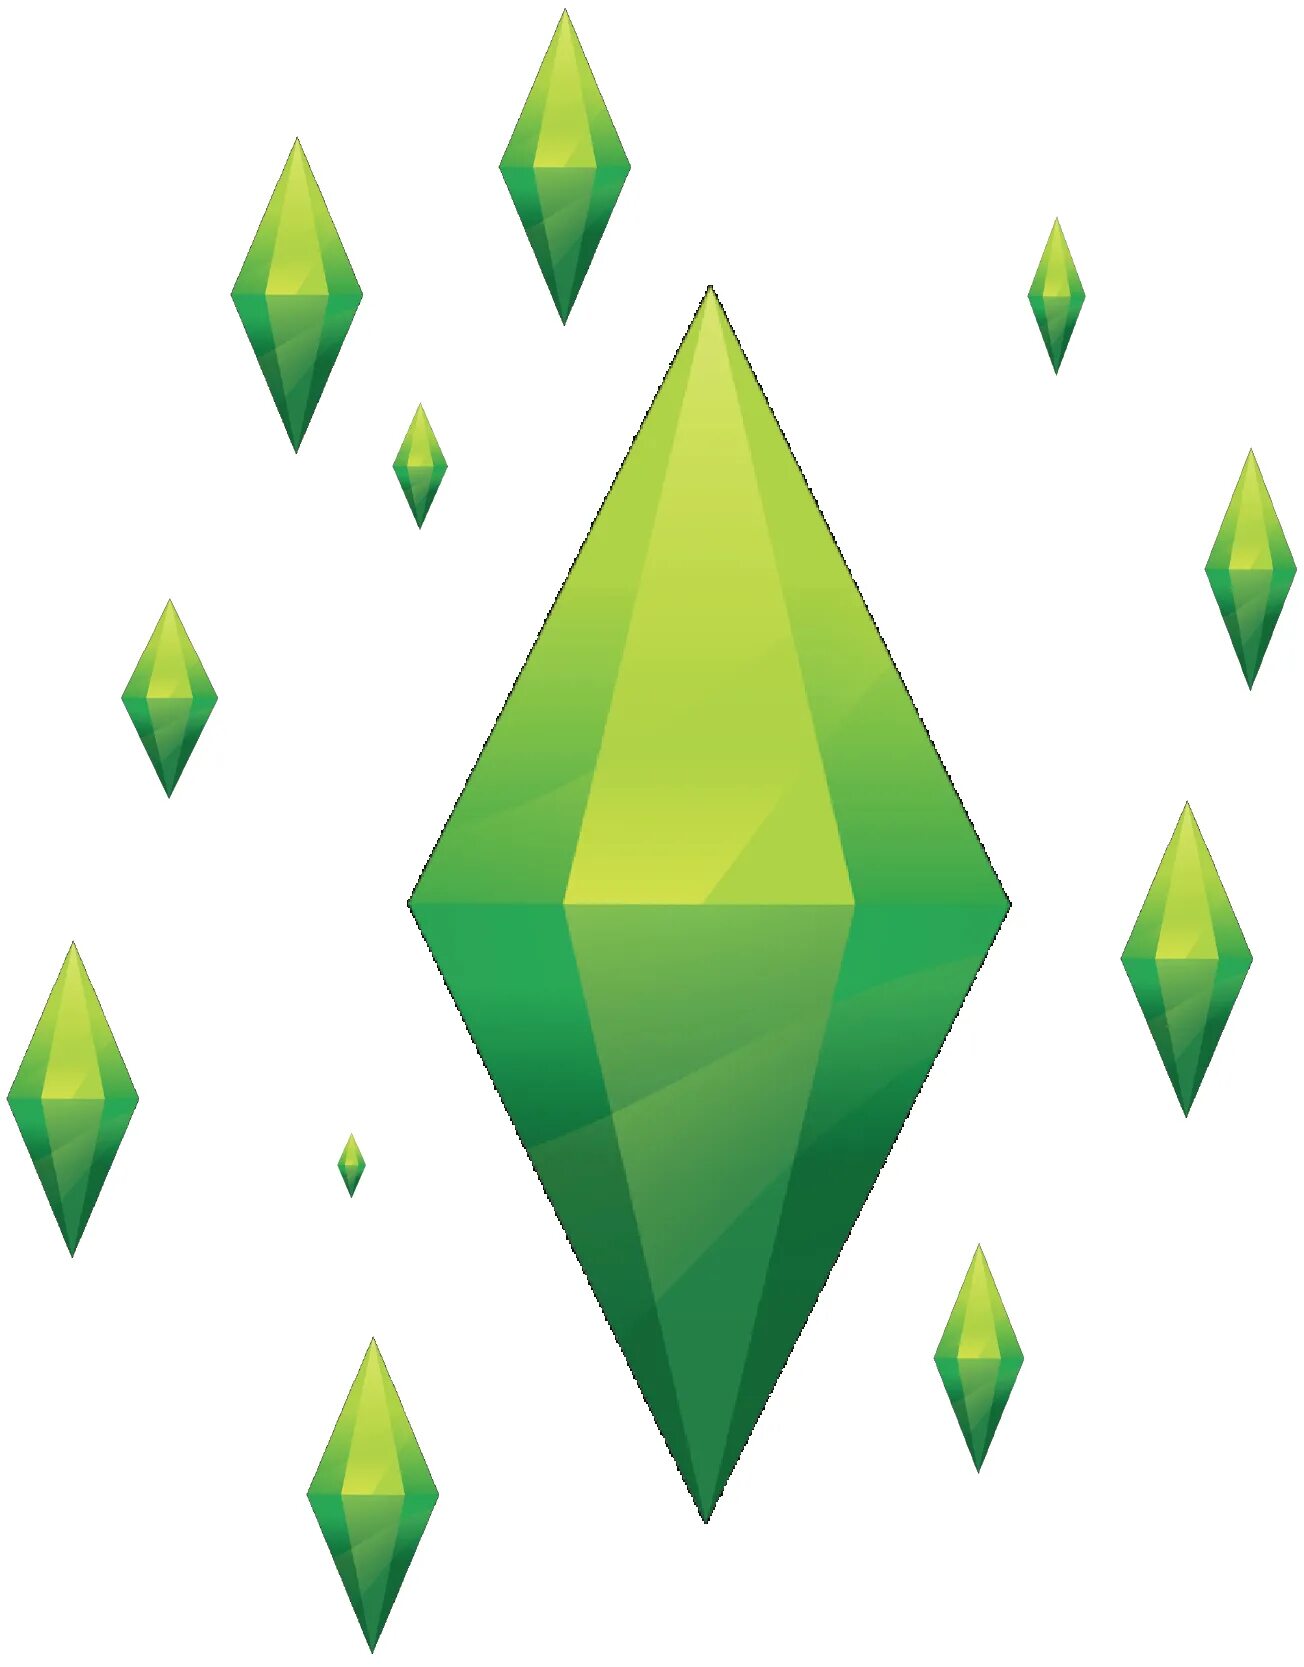 The crystal 4. SIMS пламбоб. Симс 3 пламбоб. SIMS 4 Plumbob. SIMS 4 пламбоб Кристалл.